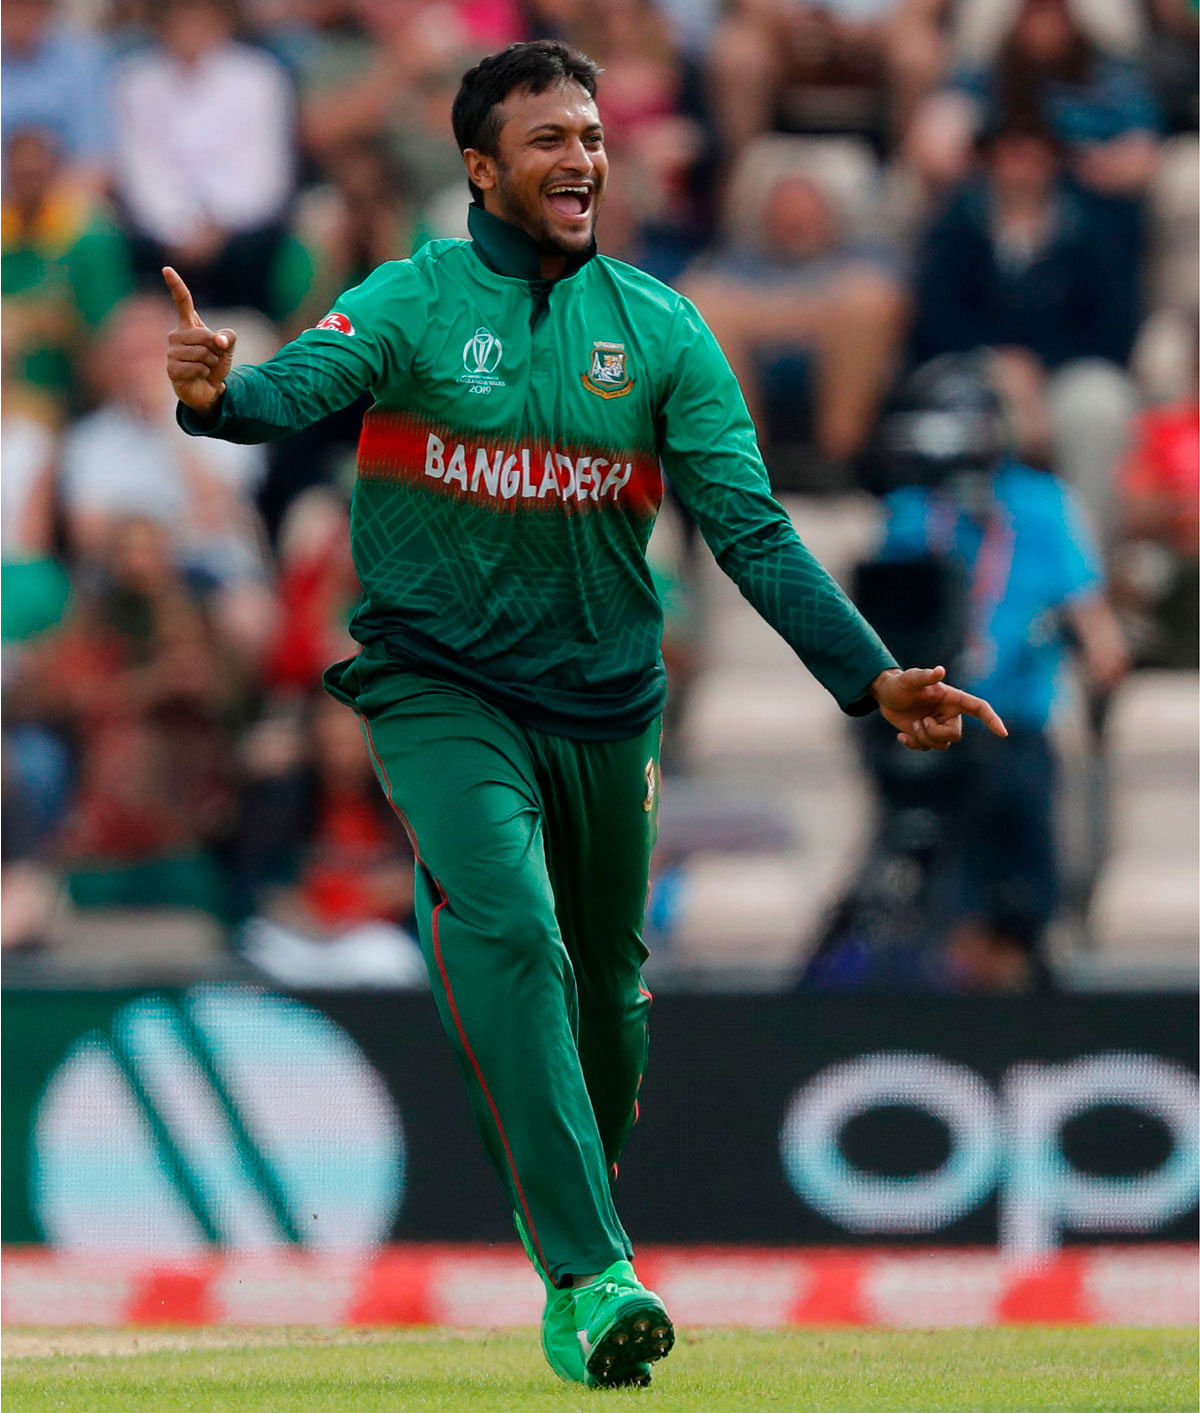 Bangladesh`s Shakib Al Hasan celebrates after the dismissal of Afghanistan`s captain Gulbadin Naibduring the 2019 Cricket World Cup group stage match between Bangladesh and Afghanistan at the Rose Bowl in Southampton, southern England, on 24 June, 2019. Photo: AFP